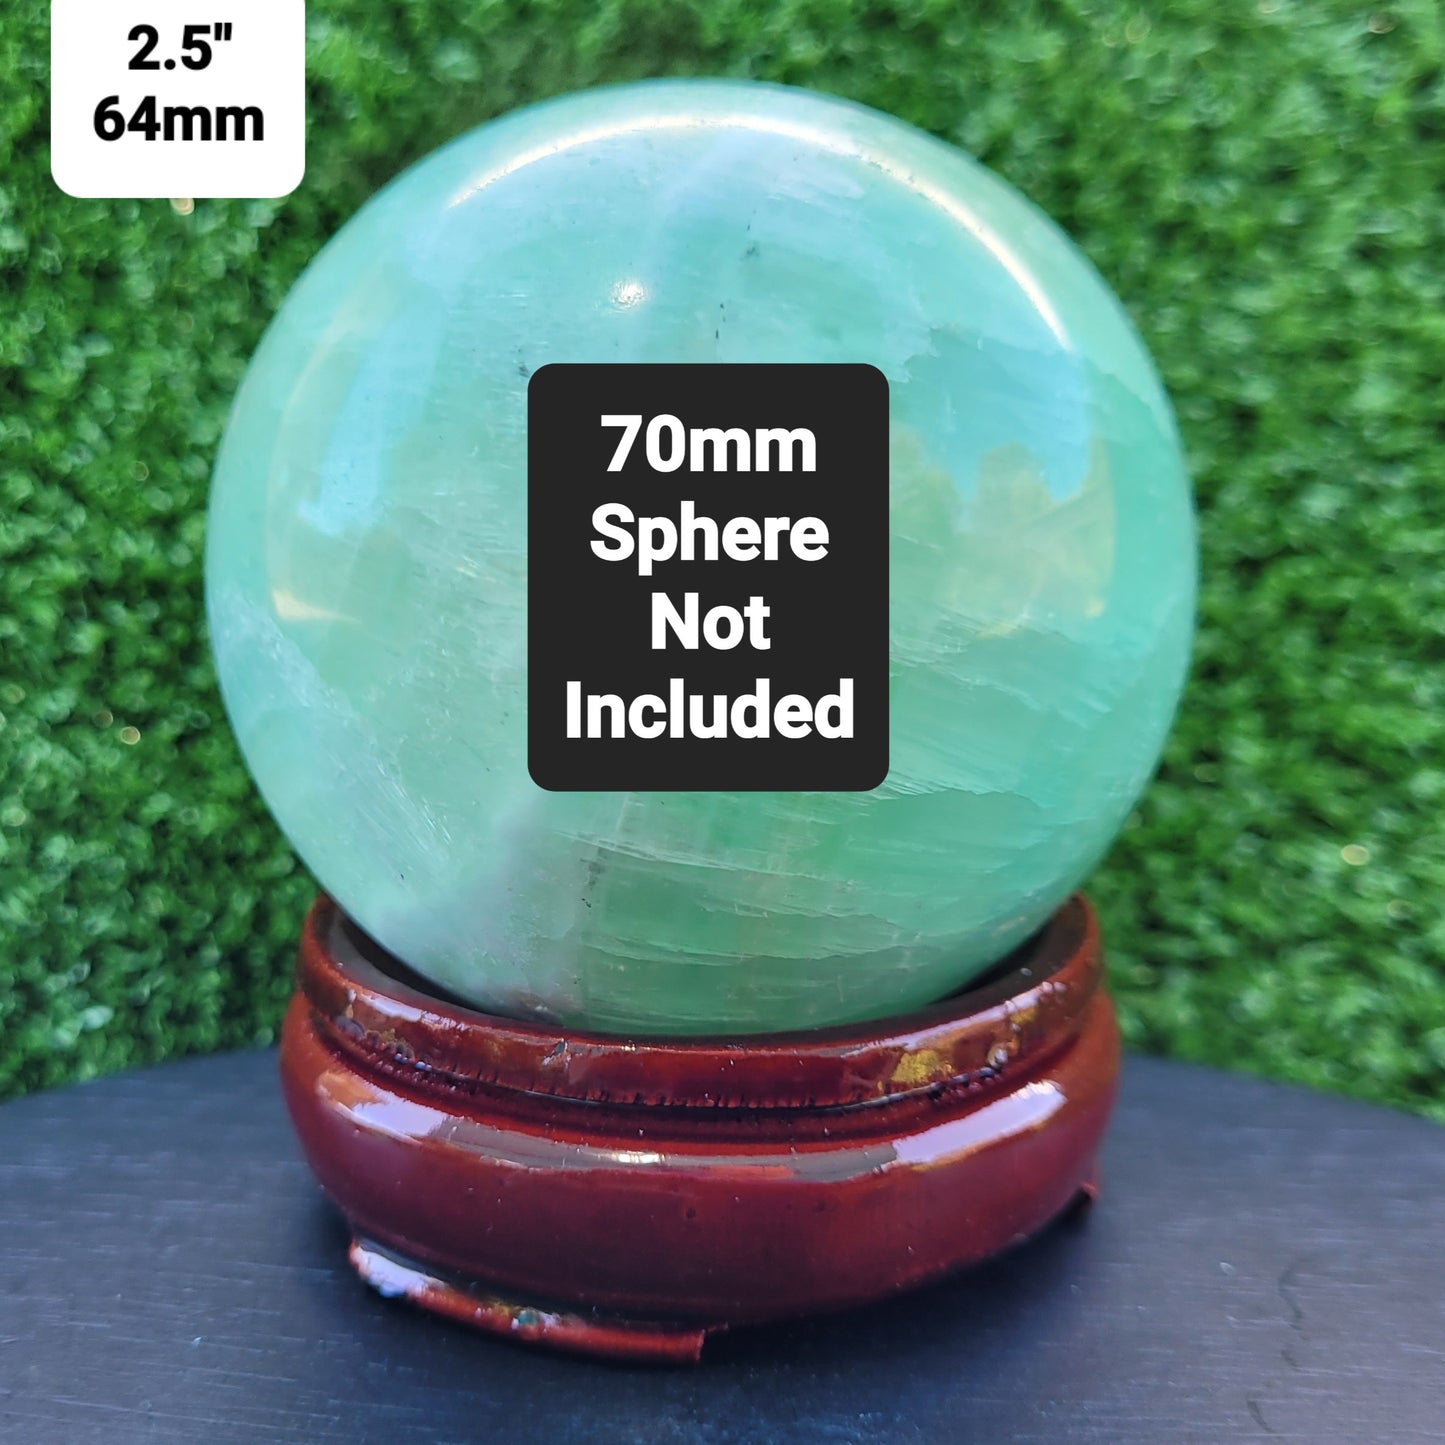 Wood Sphere Stands, Crystal Ball Holder, Display Stand for Spheres 1" to 7" (26mm to 178mm)